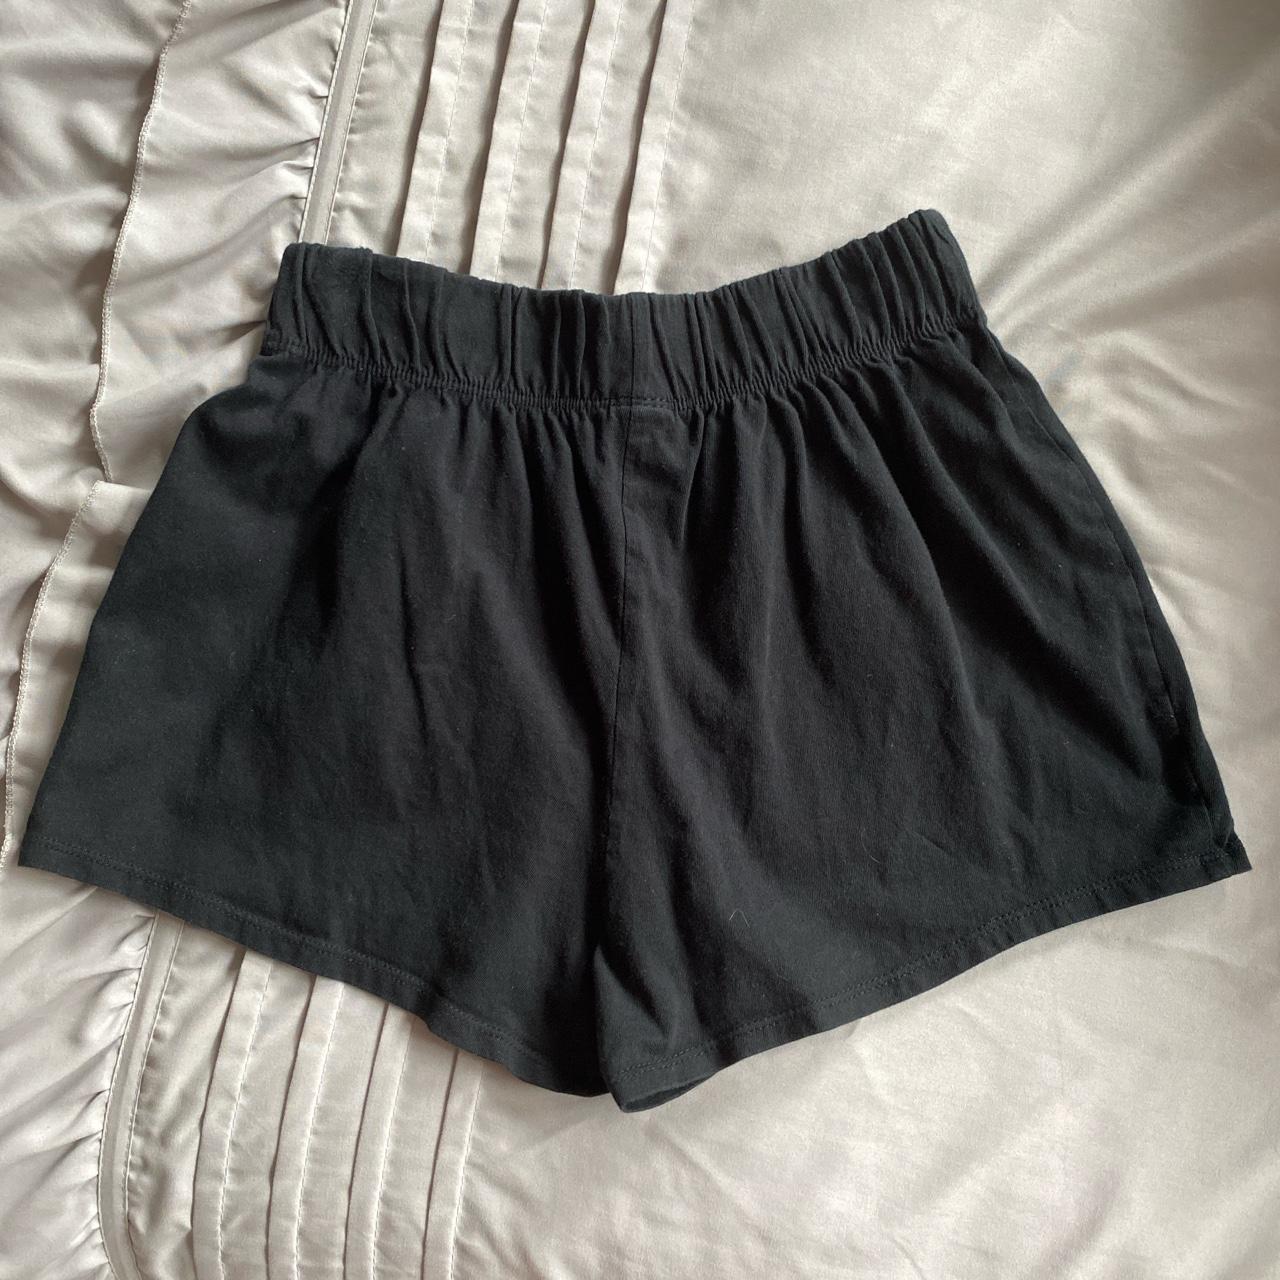 Wild fable black sweat shorts! Size xs in great... - Depop